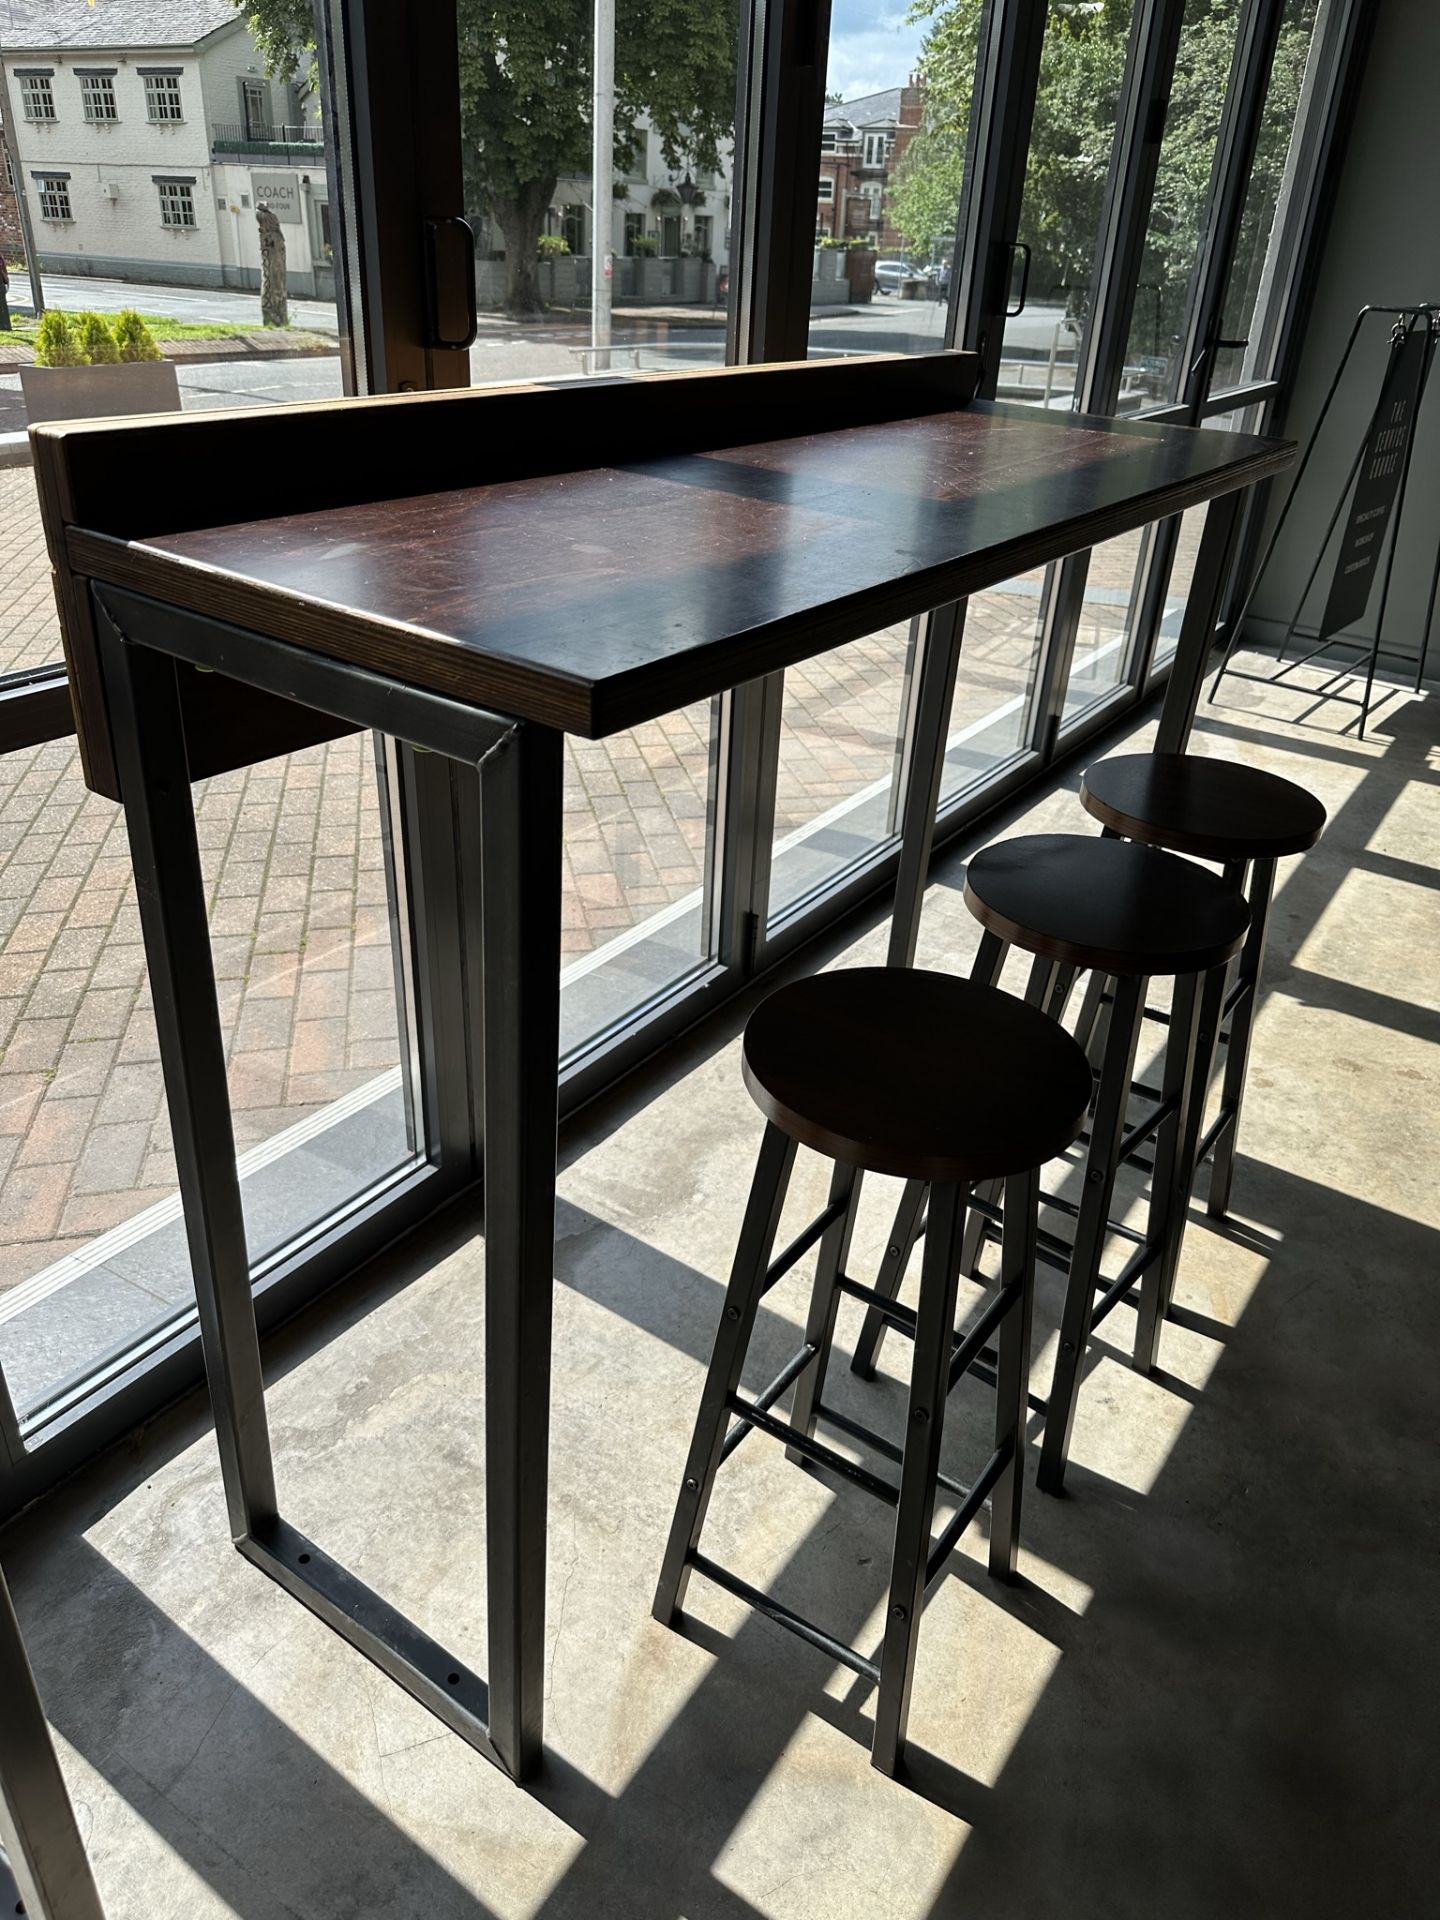 High Wooden Table With Stools With 3 Stools - Image 3 of 4